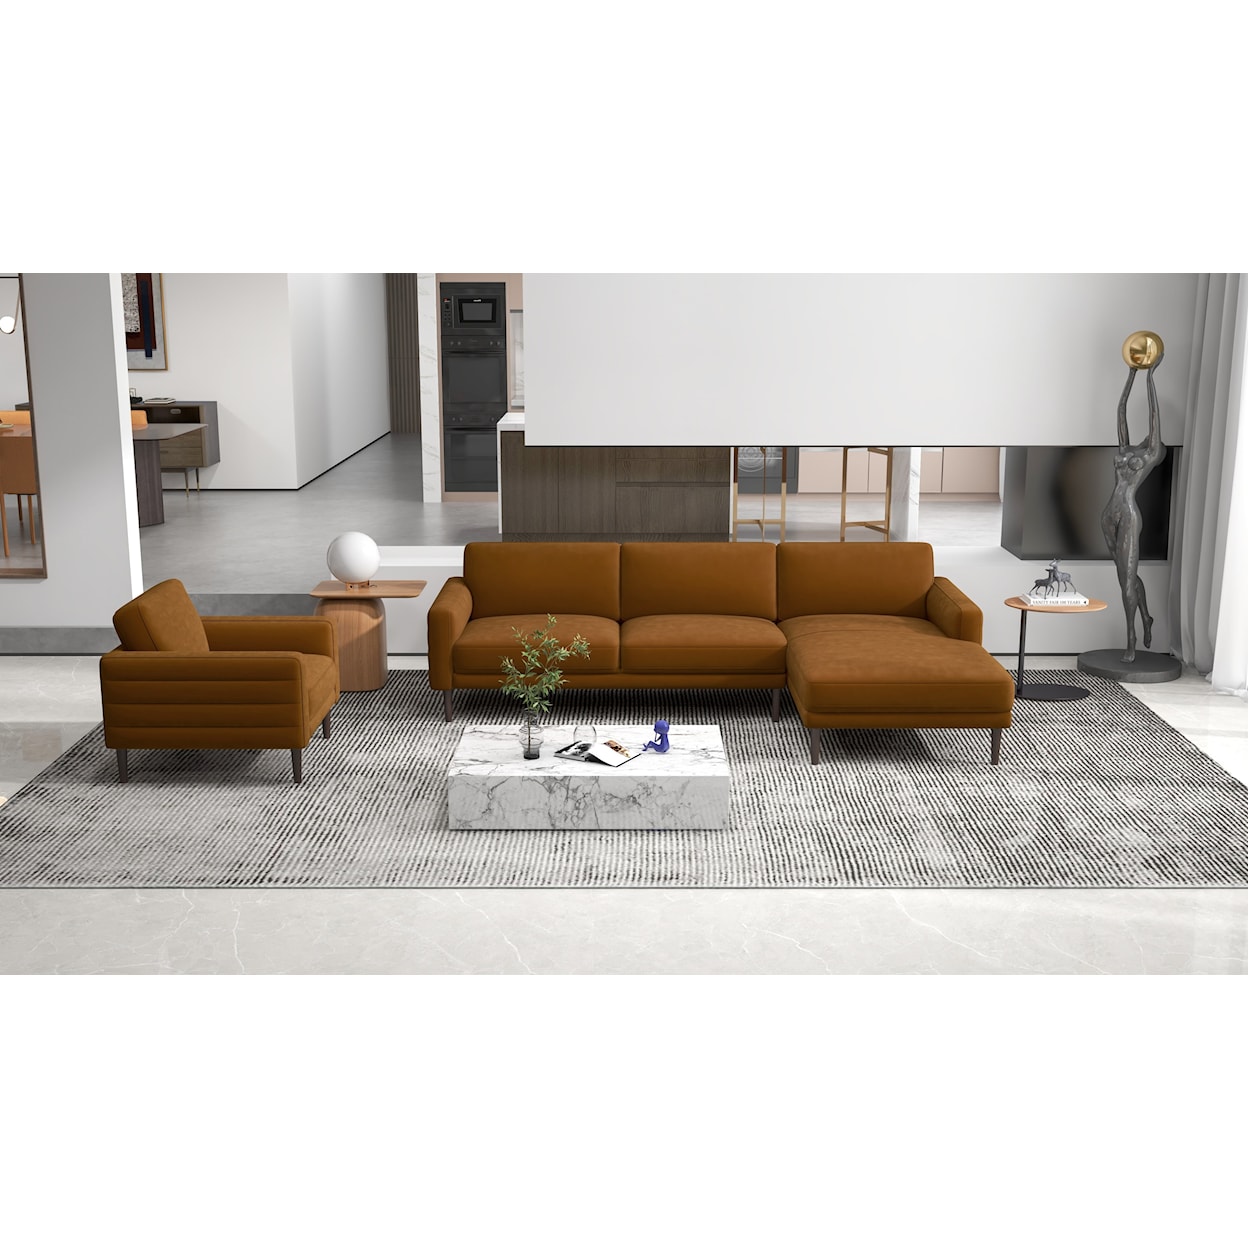 Kuka Home KT.032 2 Piece Chaise Sectional Sofa & Chair Set